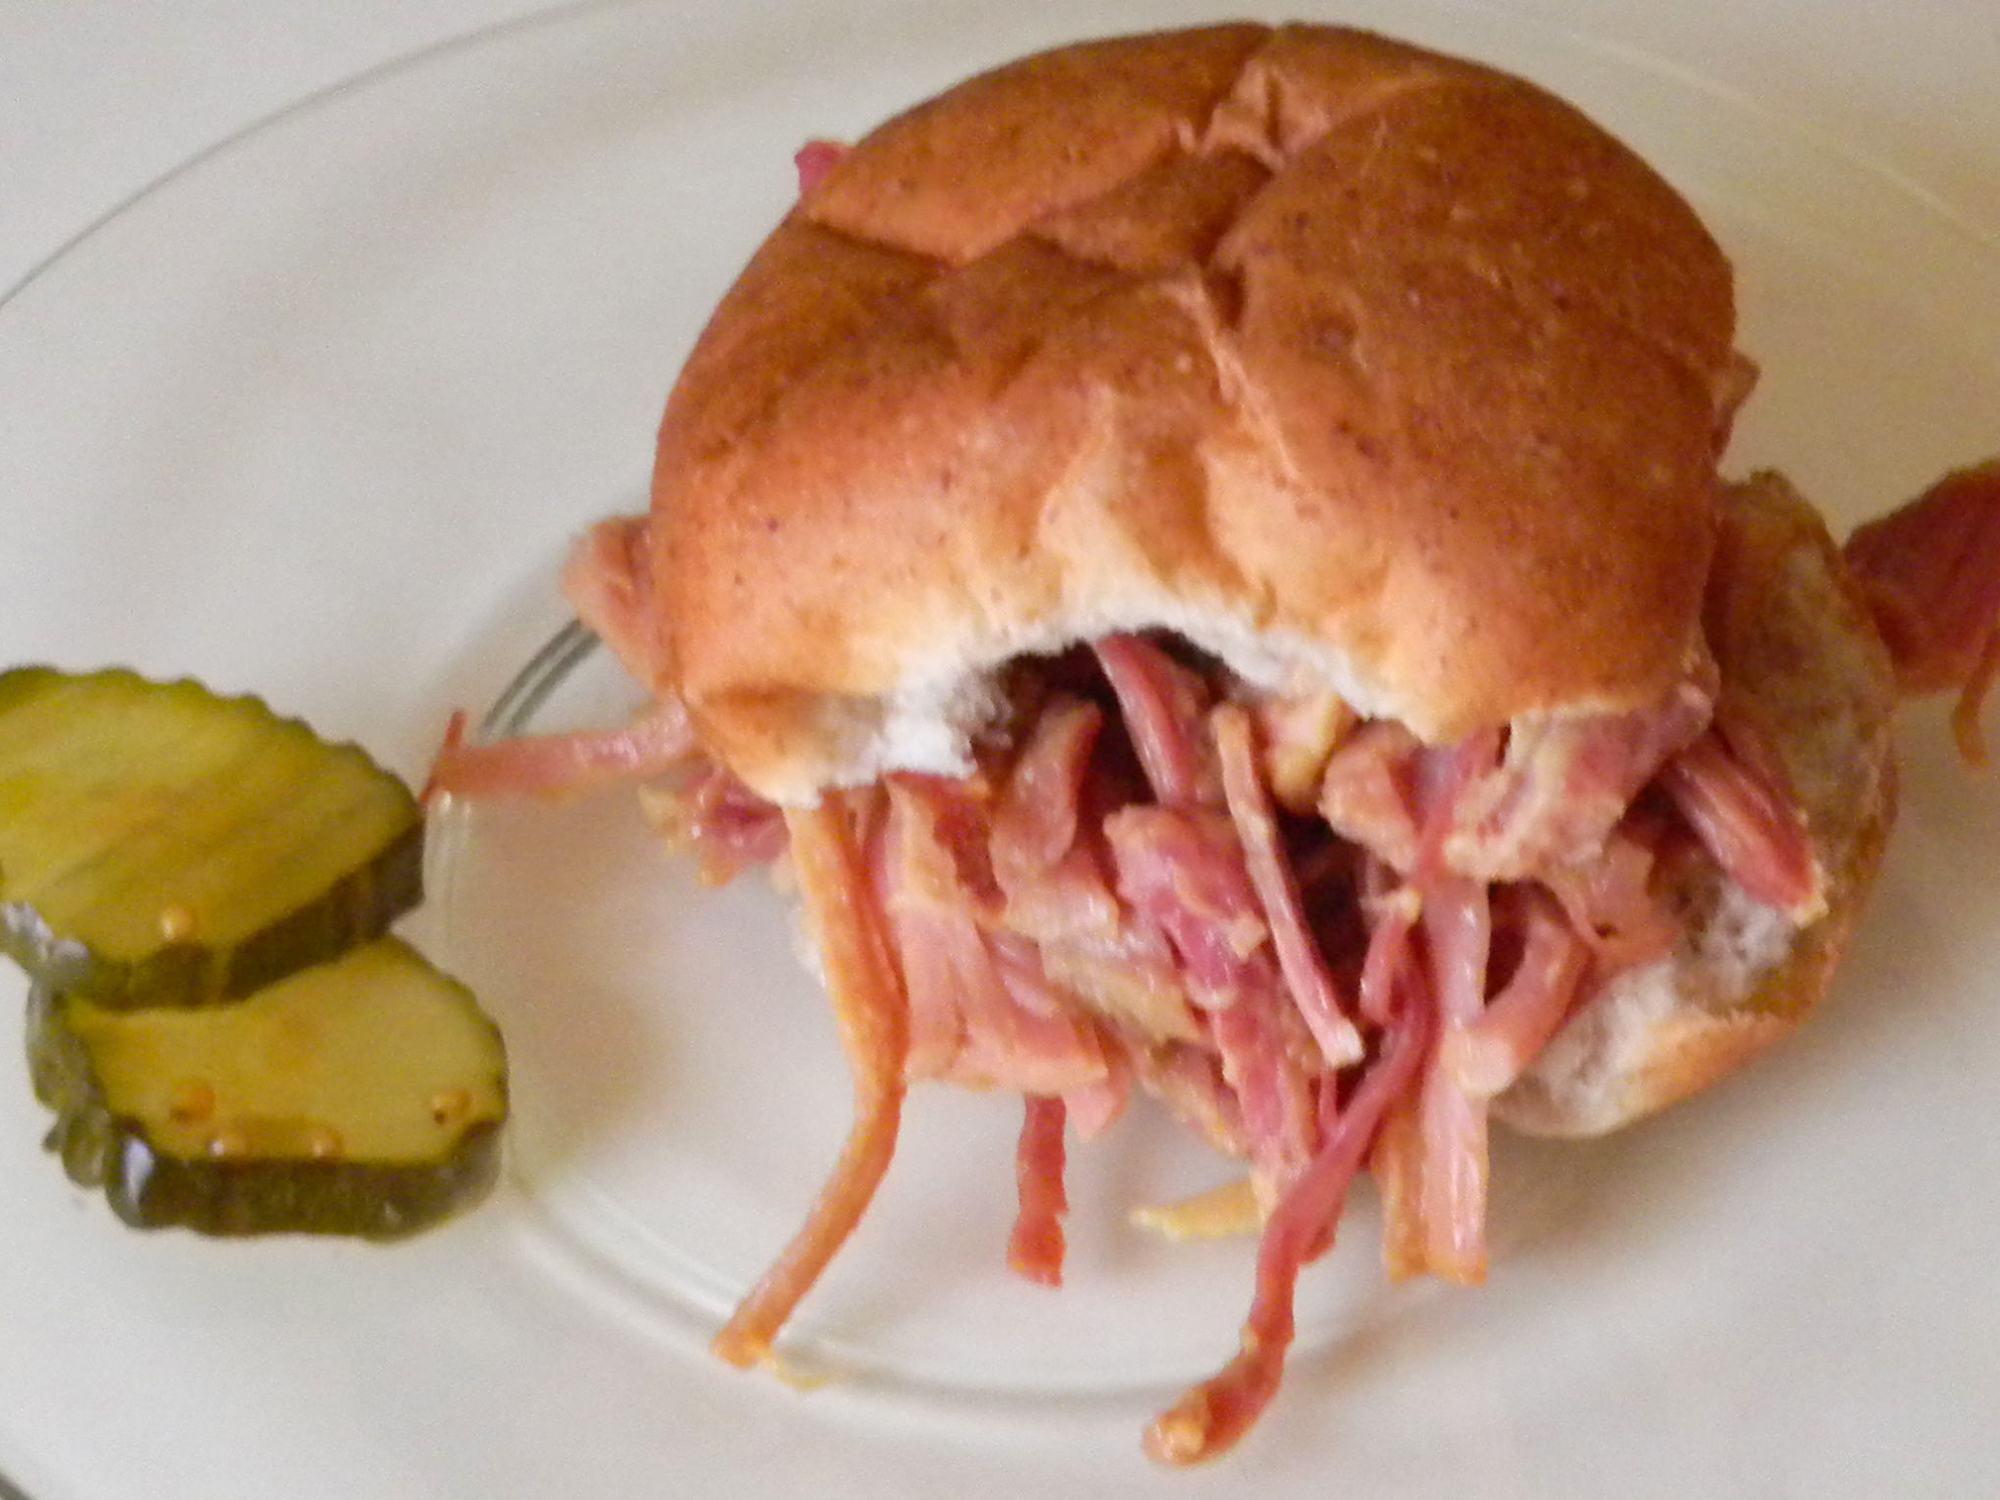 close up view of a Ham Sandwich and two pickle slices on a plate